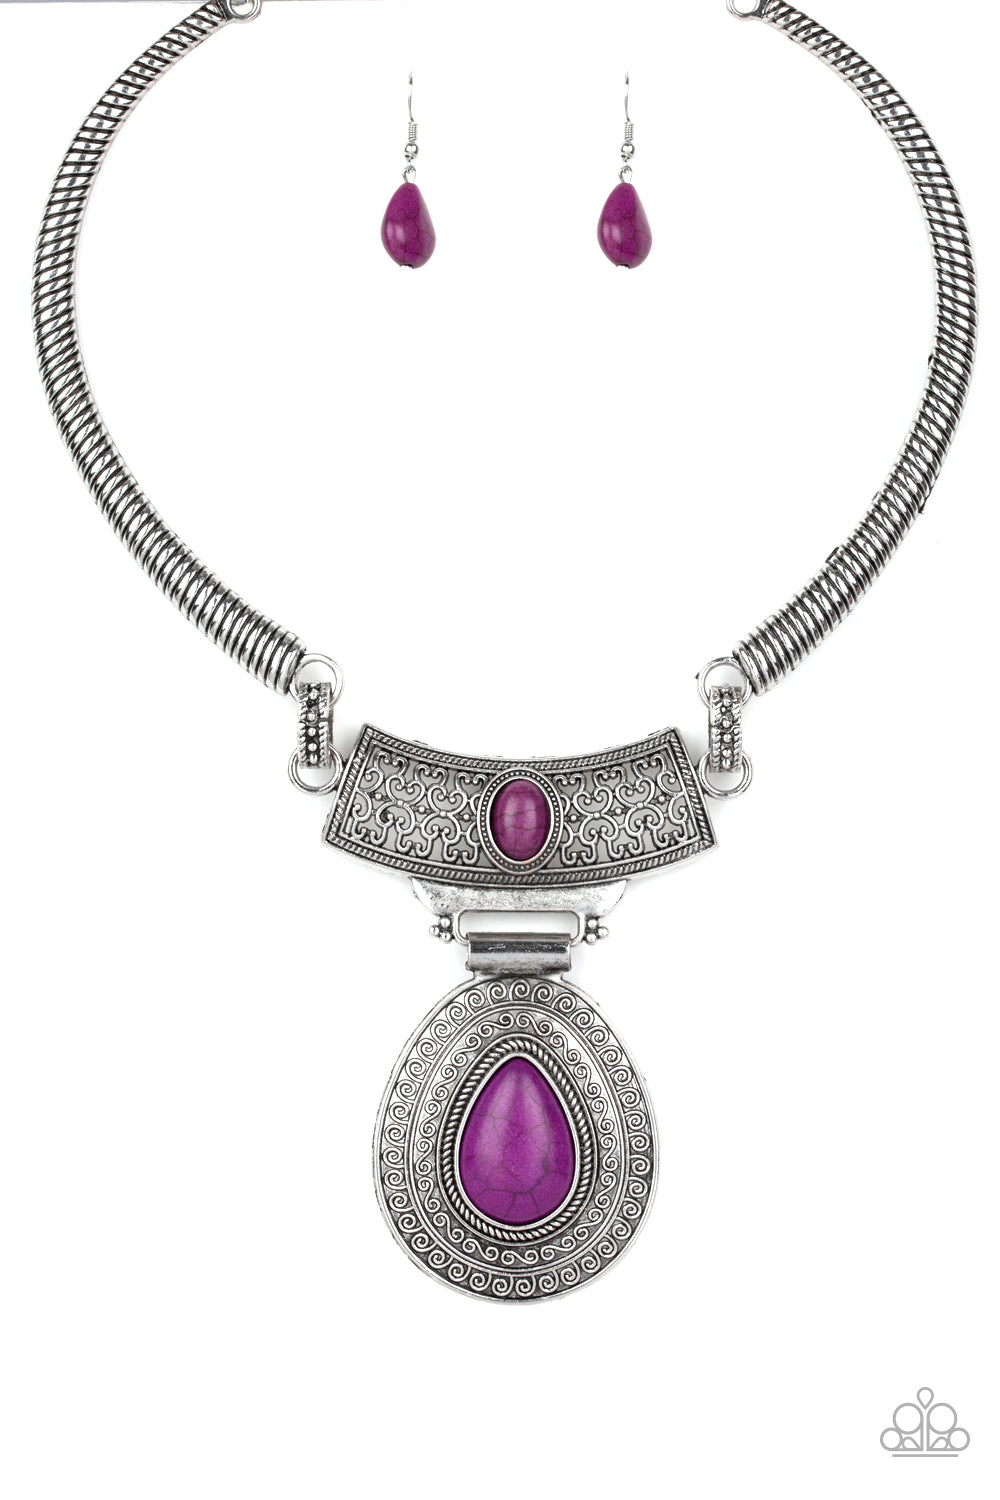 Prowling Prowess Purple Paparazzi Necklaces Cashmere Pink Jewels - Cashmere Pink Jewels & Accessories, Cashmere Pink Jewels & Accessories - Paparazzi